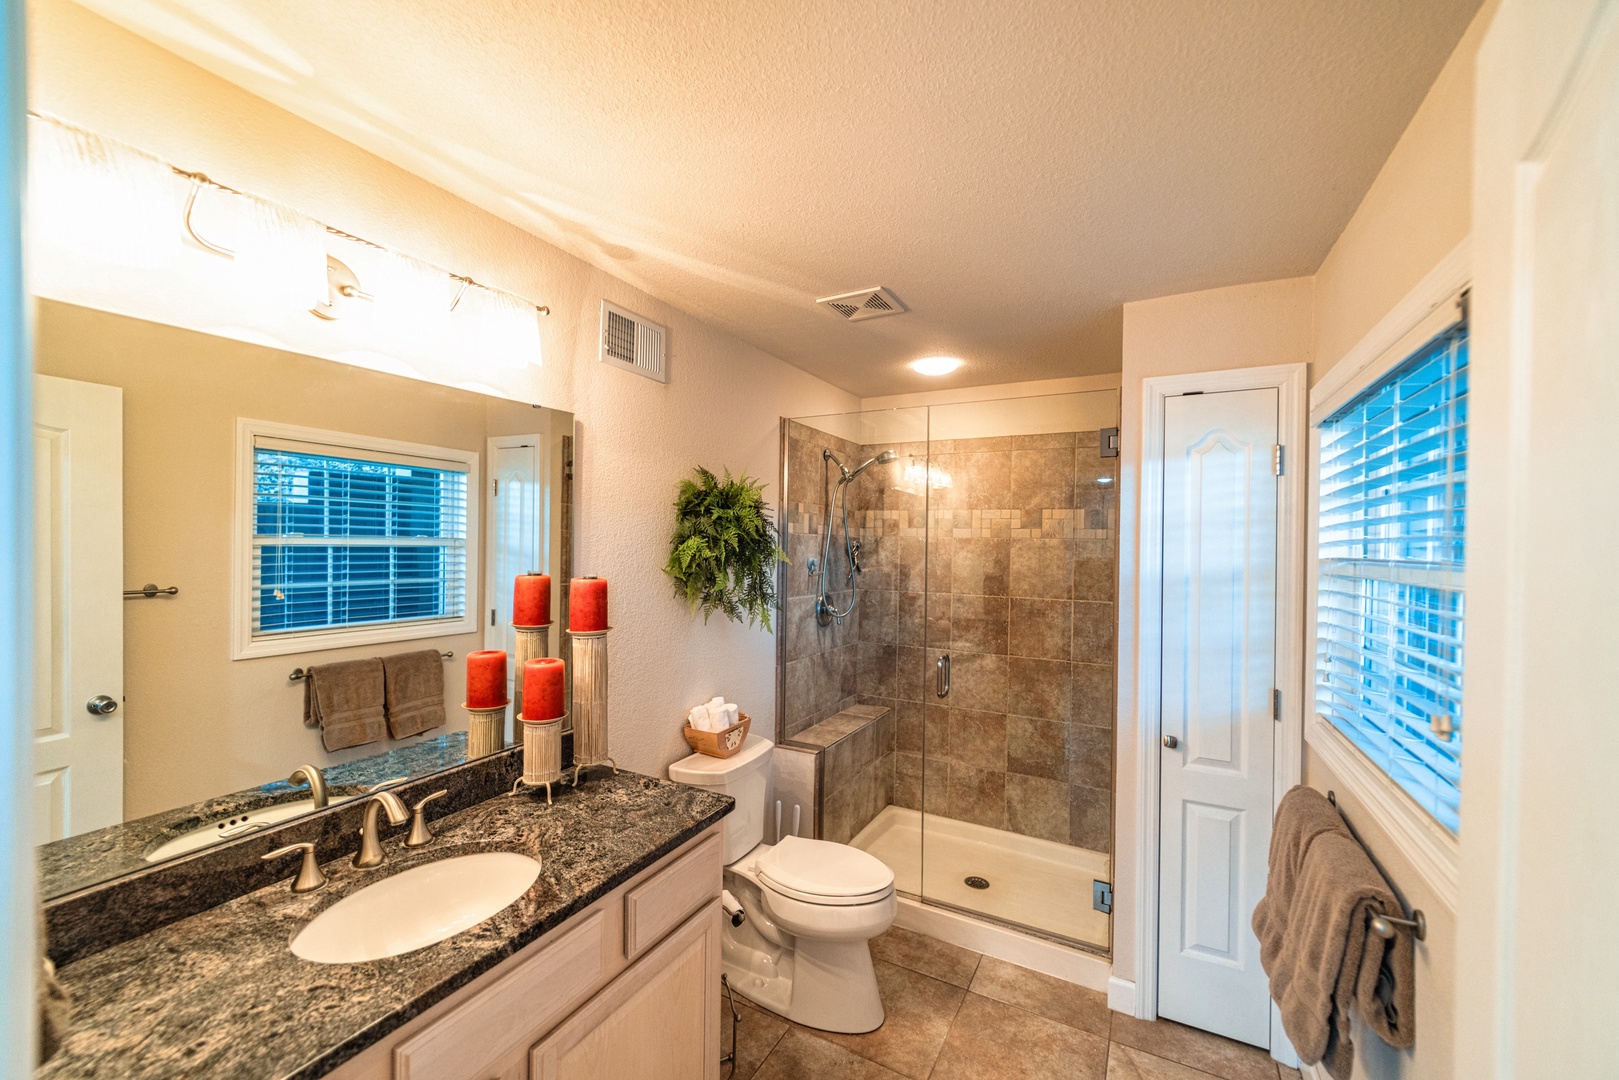 The lower-level full bath includes a single vanity & glass shower